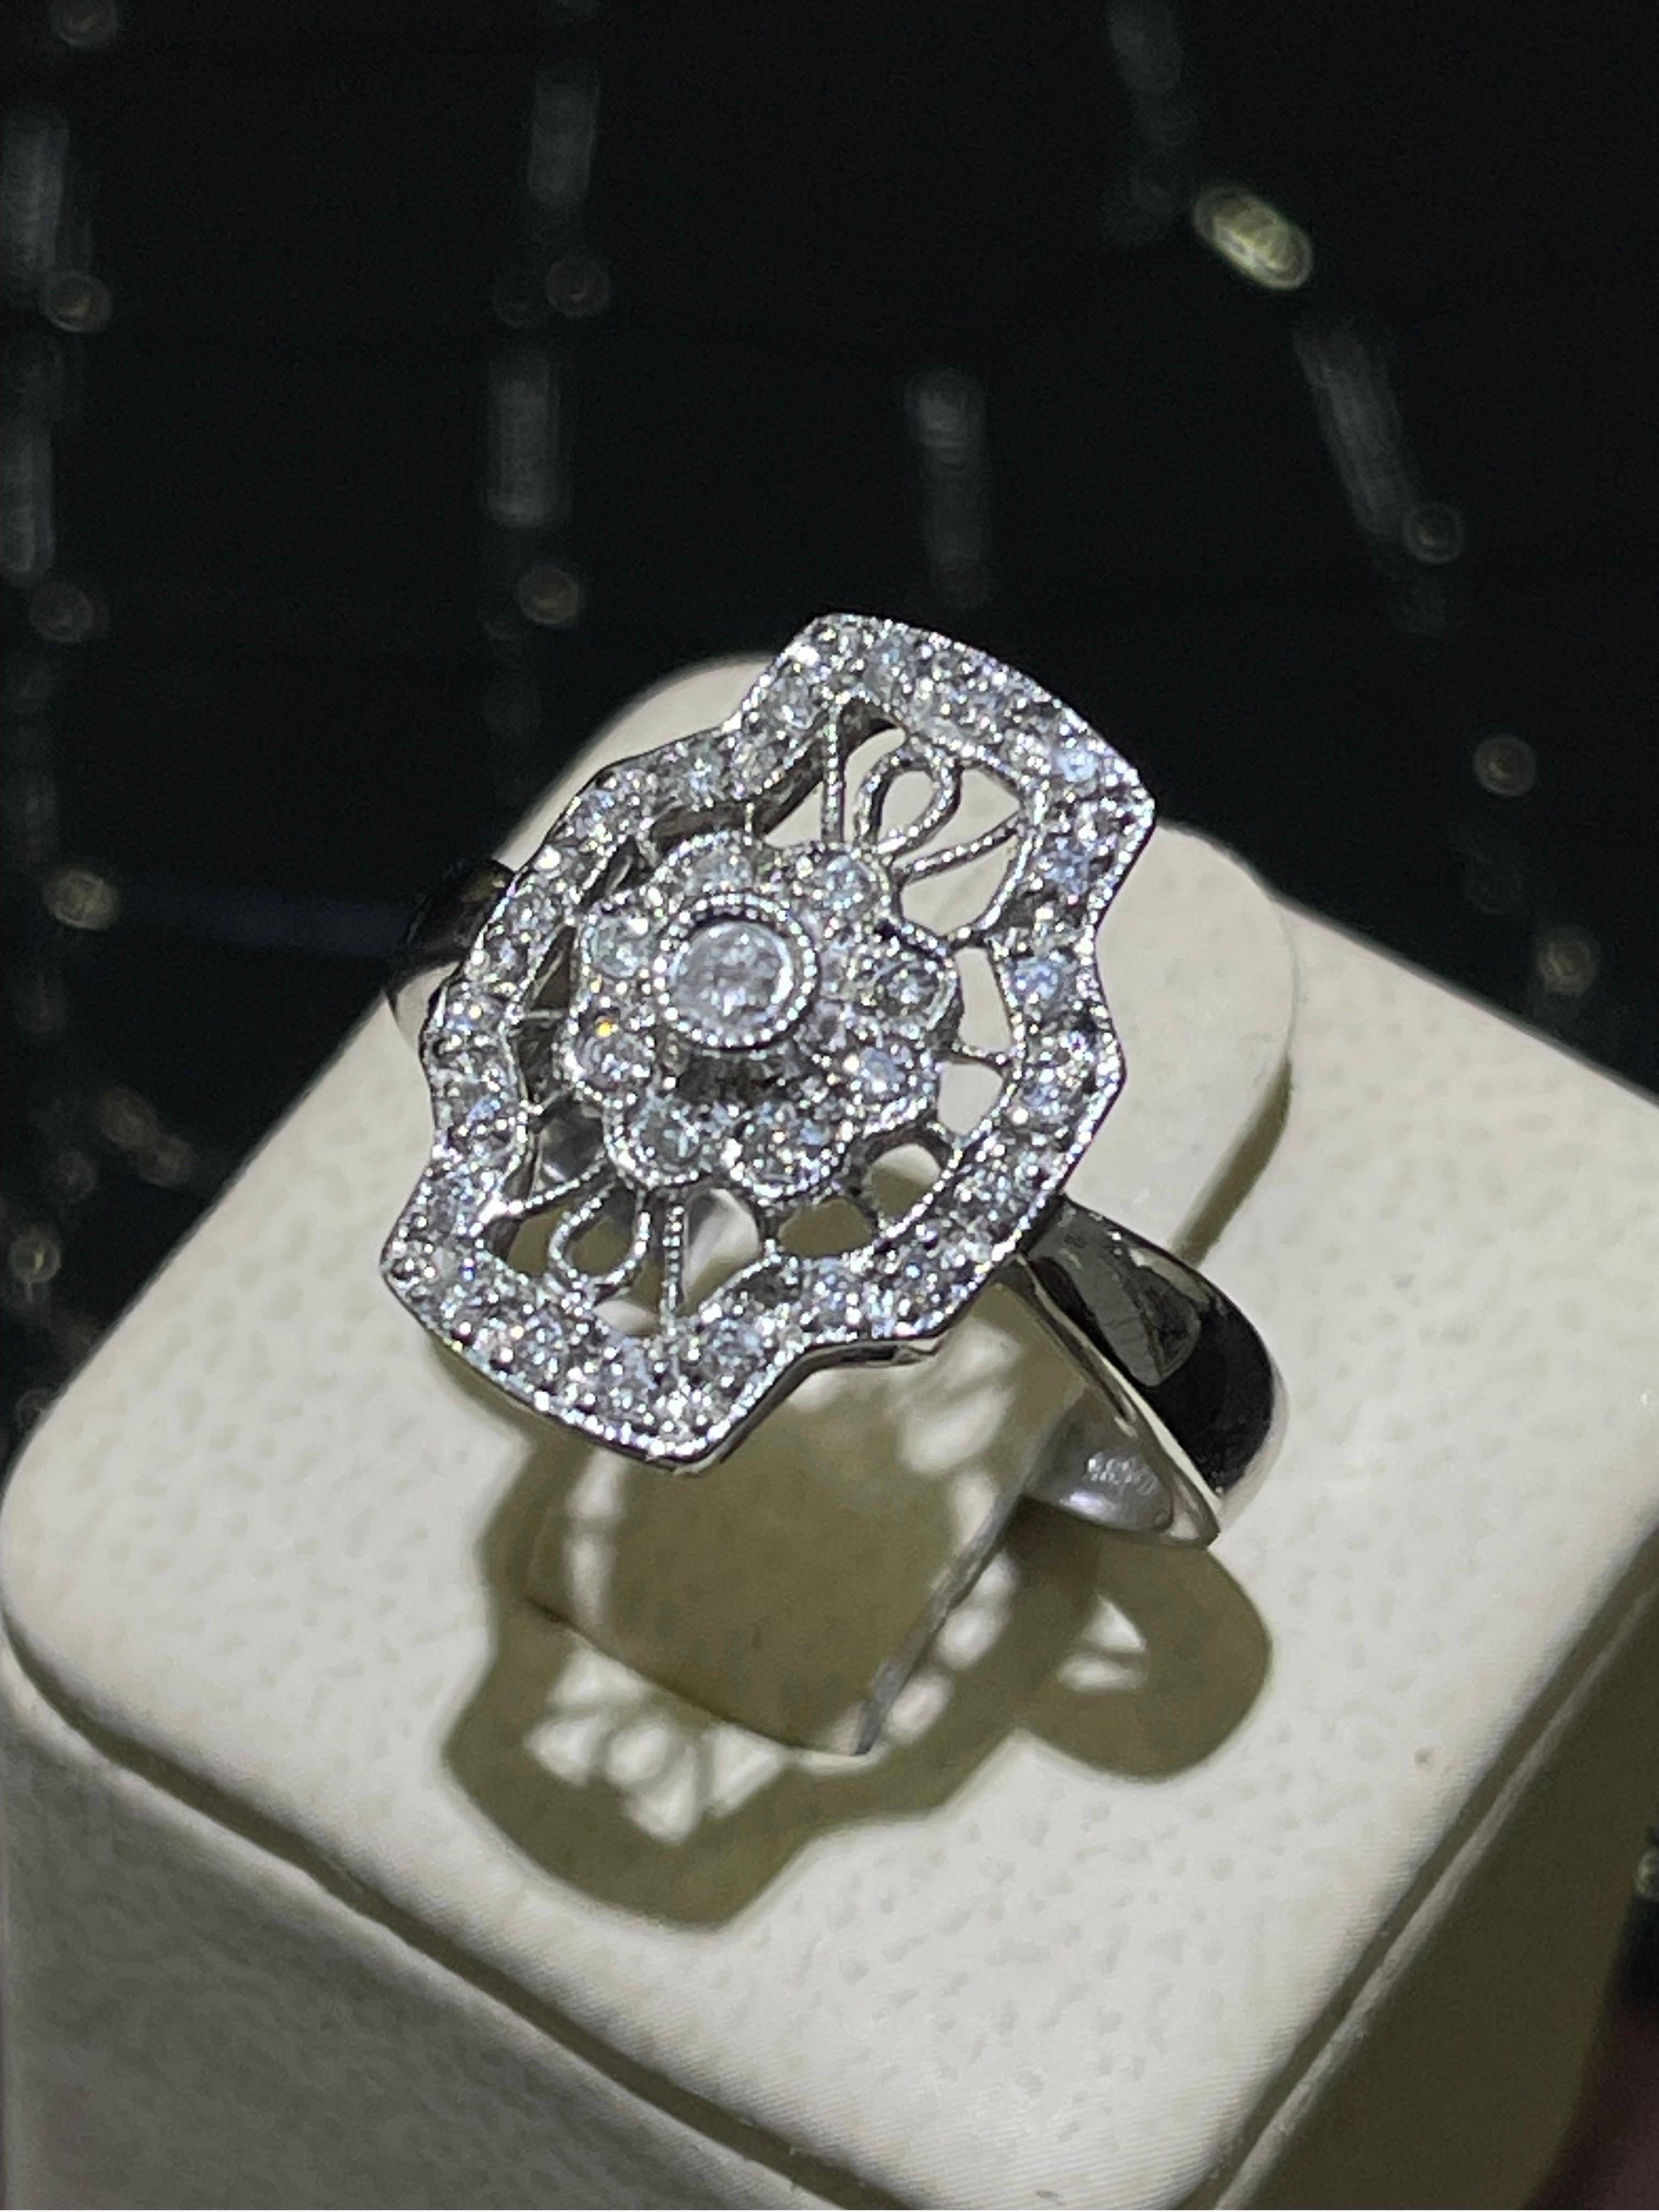 Vintage Diamond Ring In 14k White Gold. Approximately 0.3 carats in diamonds.

Size 7.5.